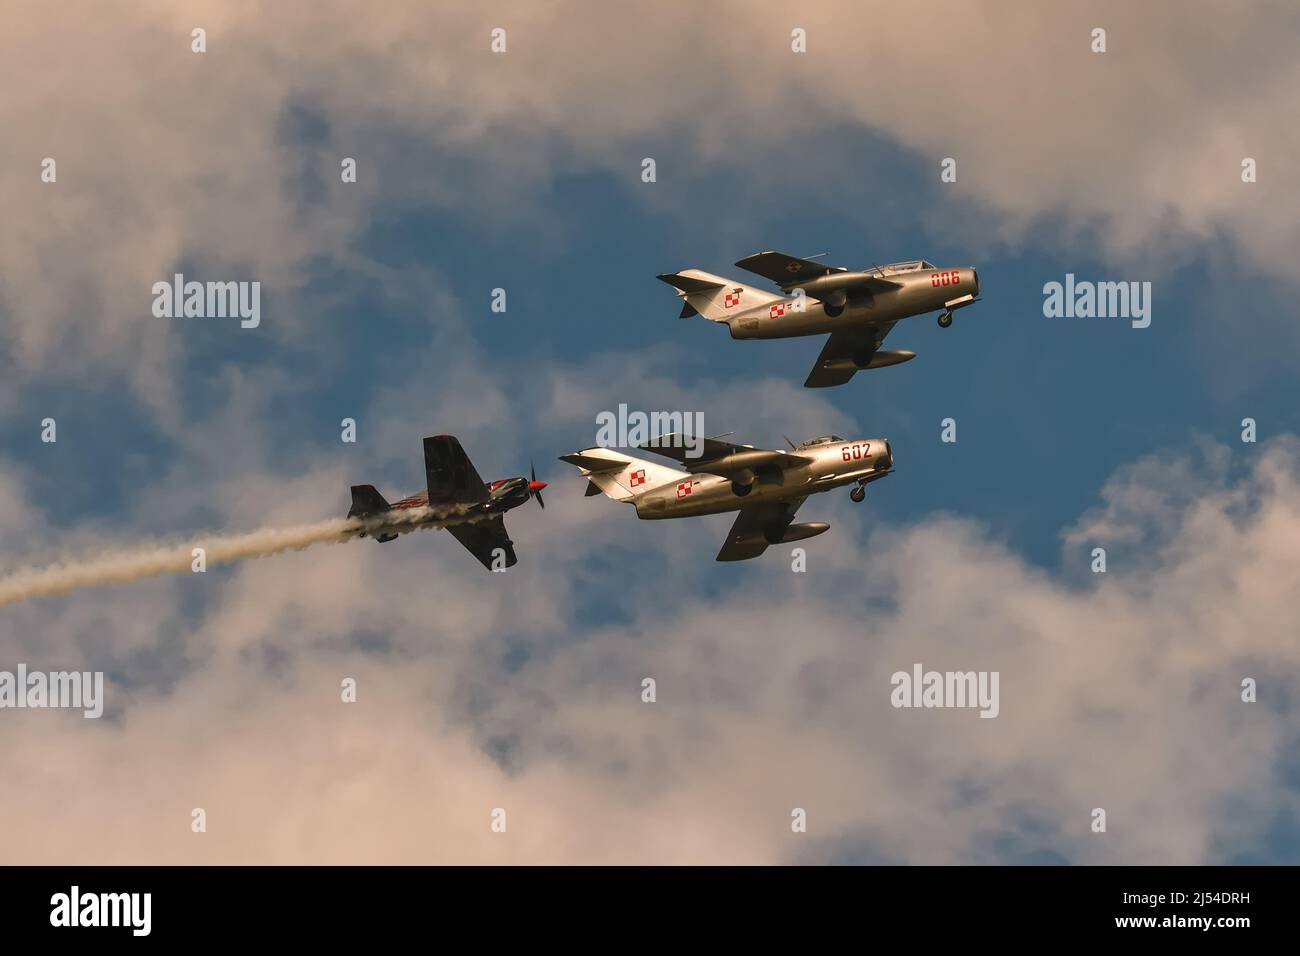 Gdynia, Poland - August 22, 2021: Flight of MIG-15 and XtremeAir XA-41 planes at the Aero Baltic show in Gdynia, Poland. Stock Photo